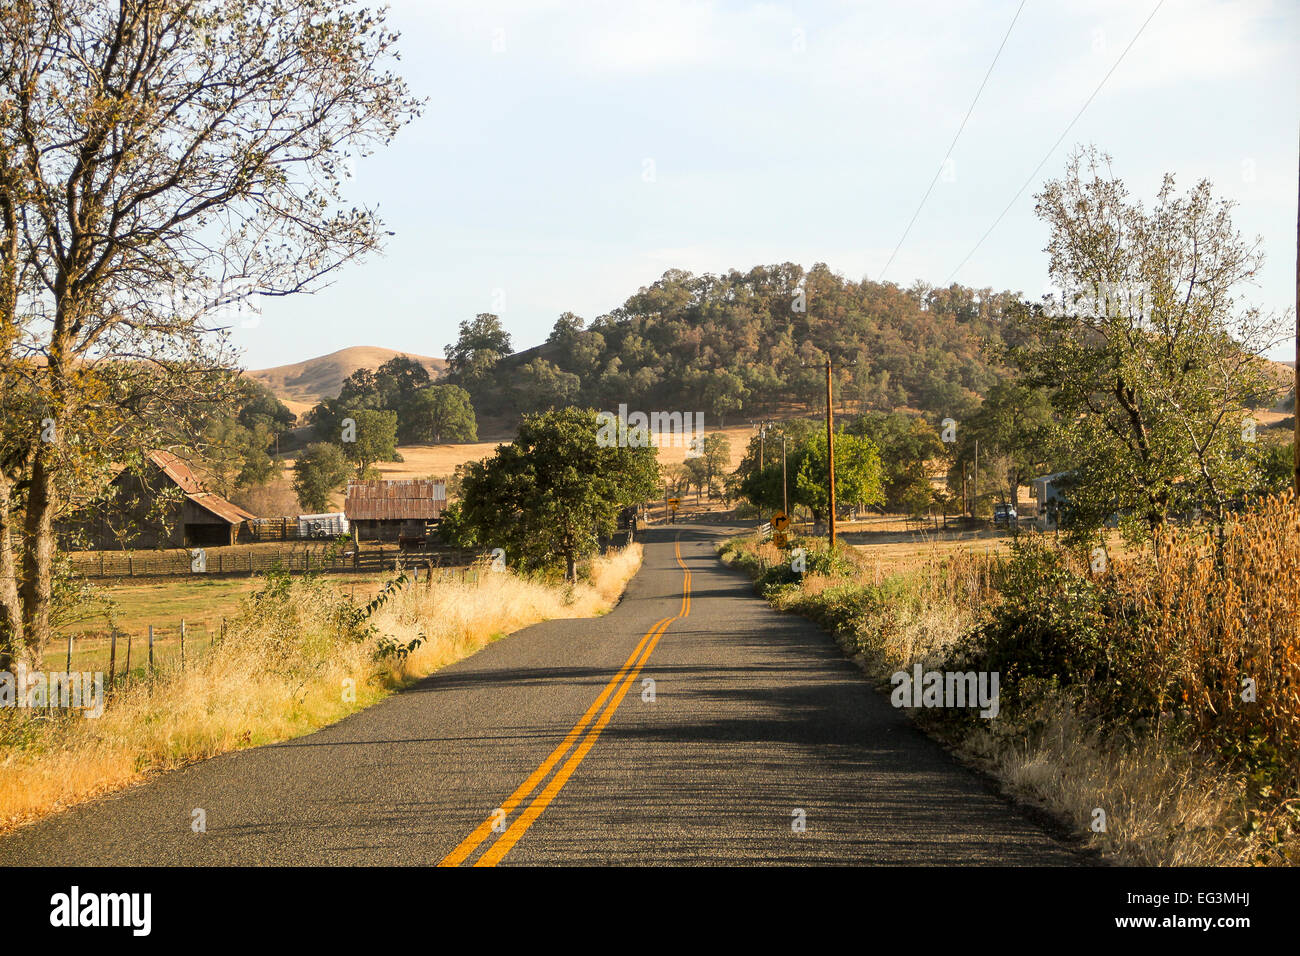 A road in the remote town of Ono, Shasta County, California, United States Stock Photo